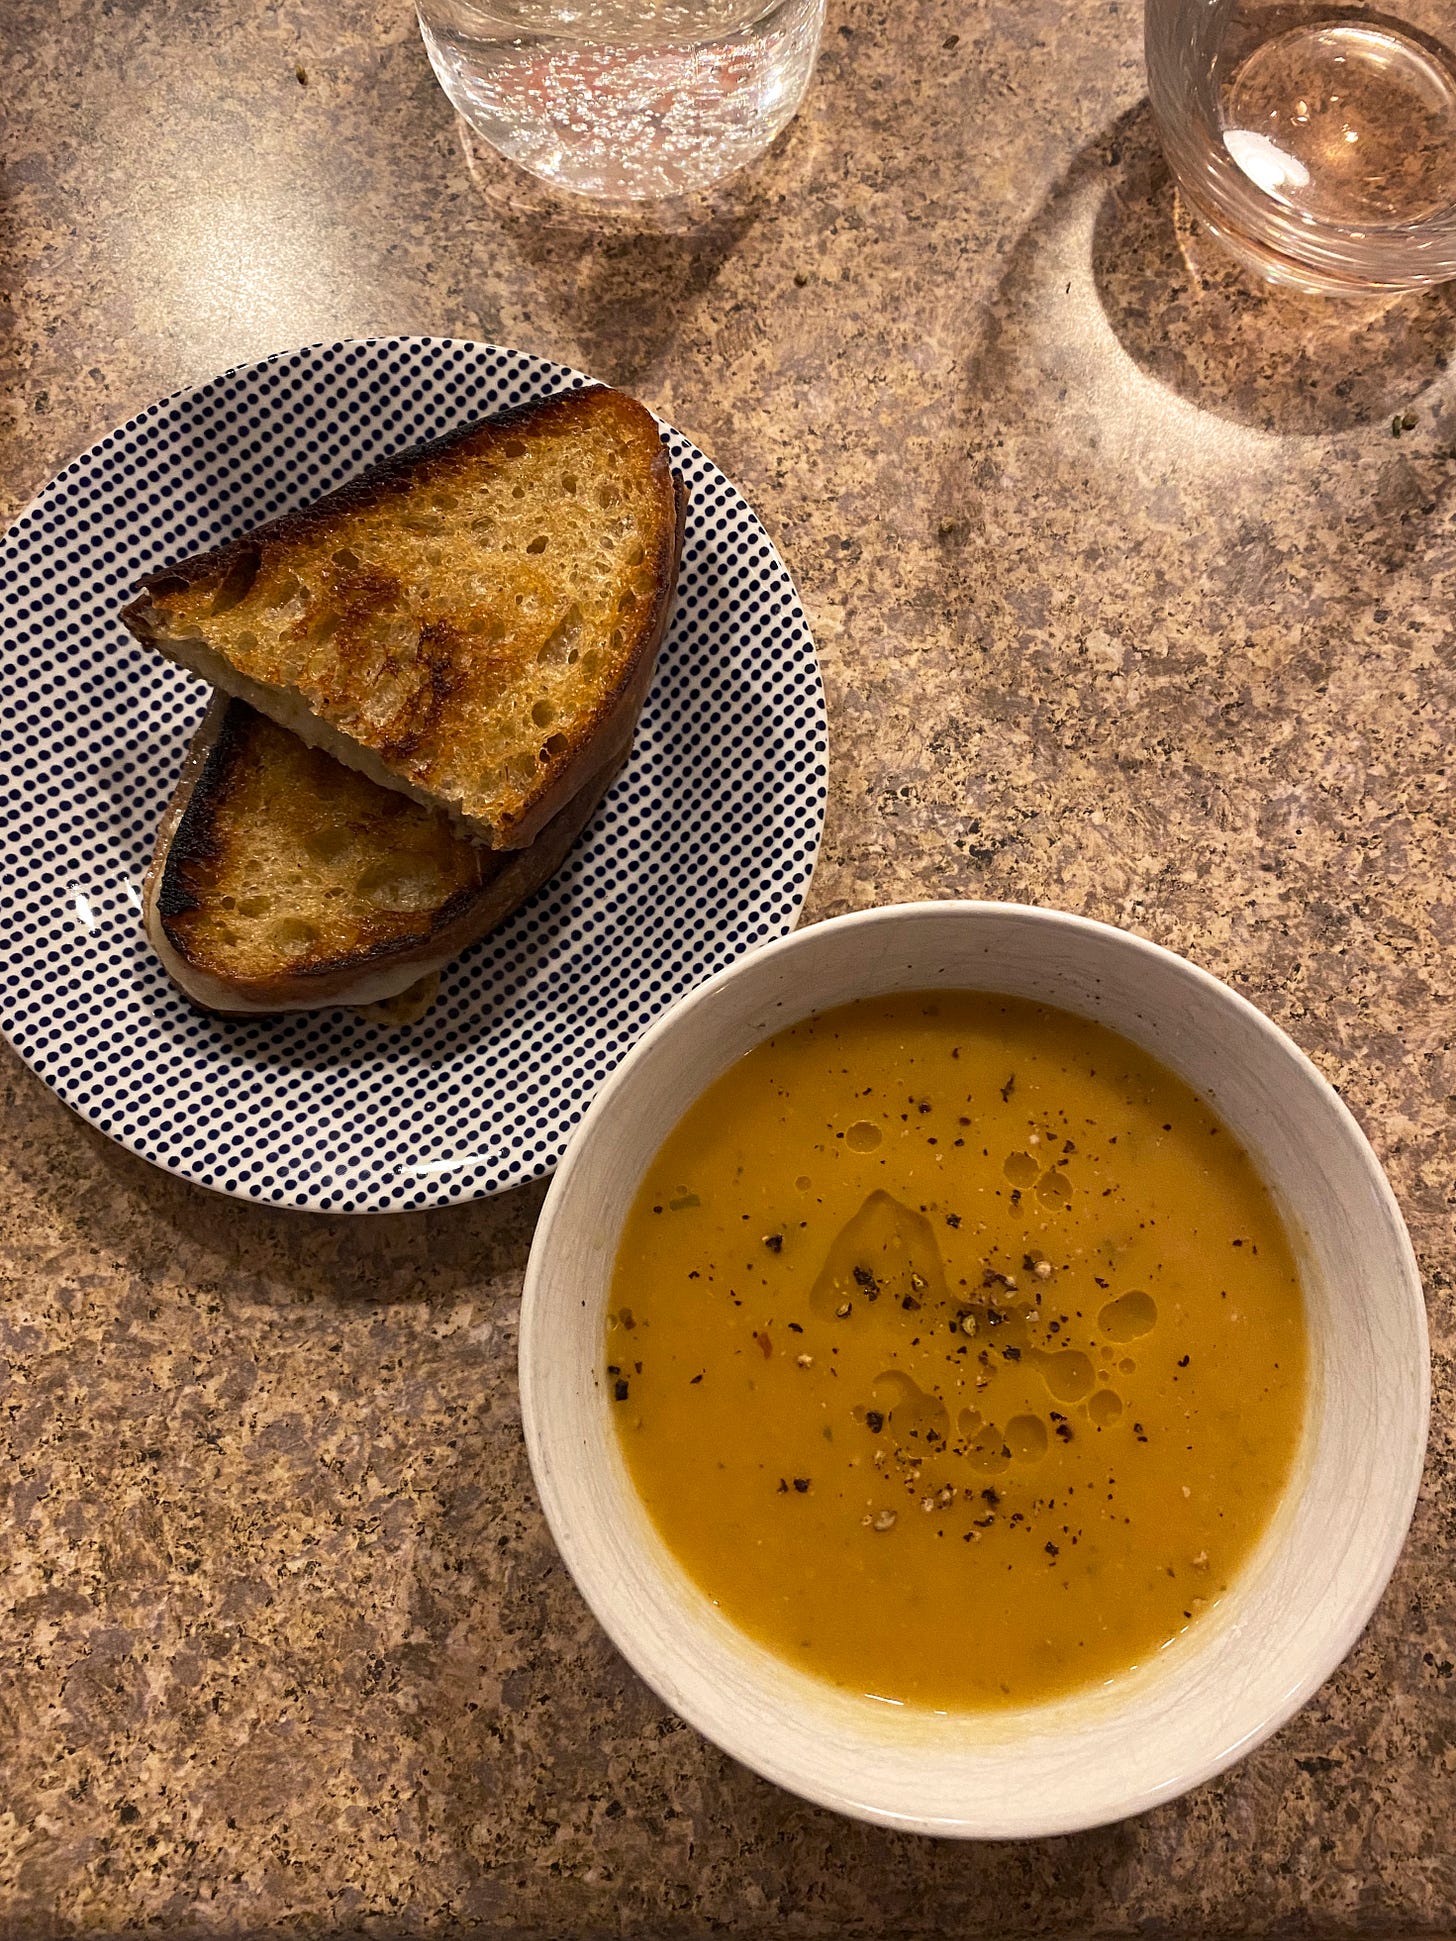 A small white bowl of orange-ish soup, dusted with black pepper and drizzled with olive oil. Slightly above and to its left is a blue and white dotted plate with two halves of a grilled cheese on it. In the right corner is a glass of rosé wine.